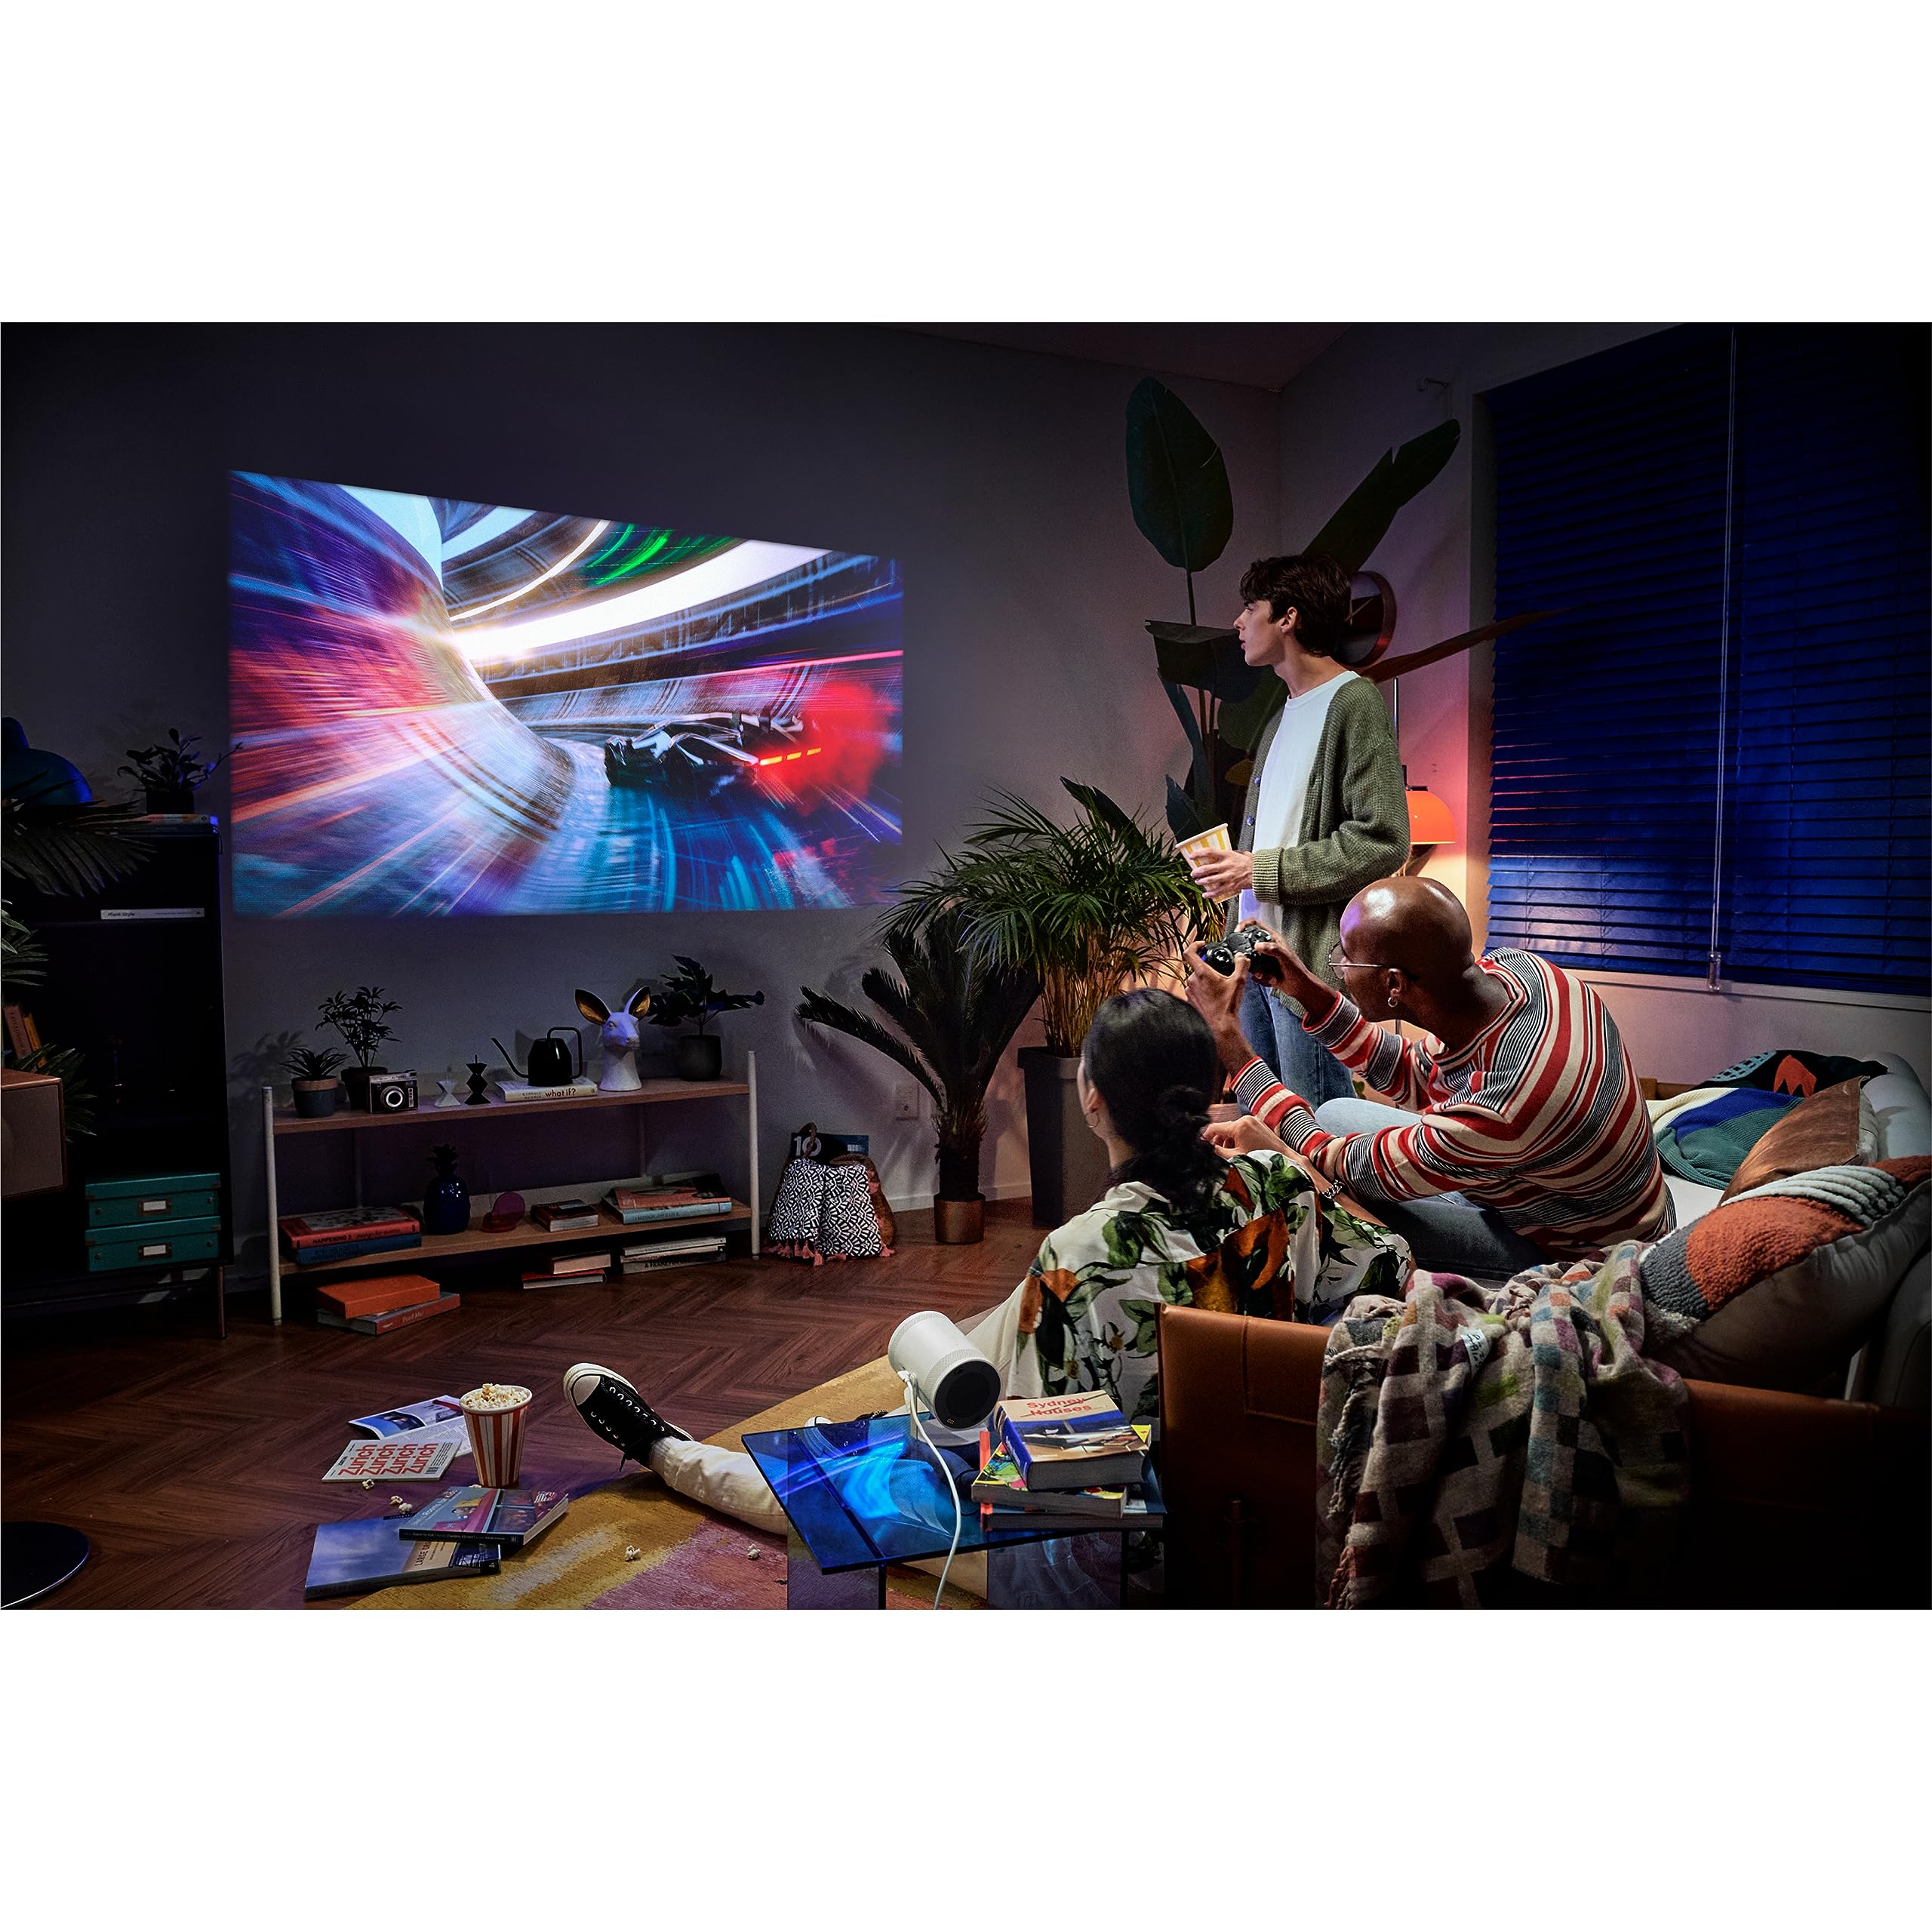 SAMSUNG 30” - 100” The Freestyle Gen 2 with Gaming Hub Smart Portable Projector, FHD, HDR, Big Screen Home Theater Experience, 360 Sound, SP-LFF3CLAXZA, 2023 Model